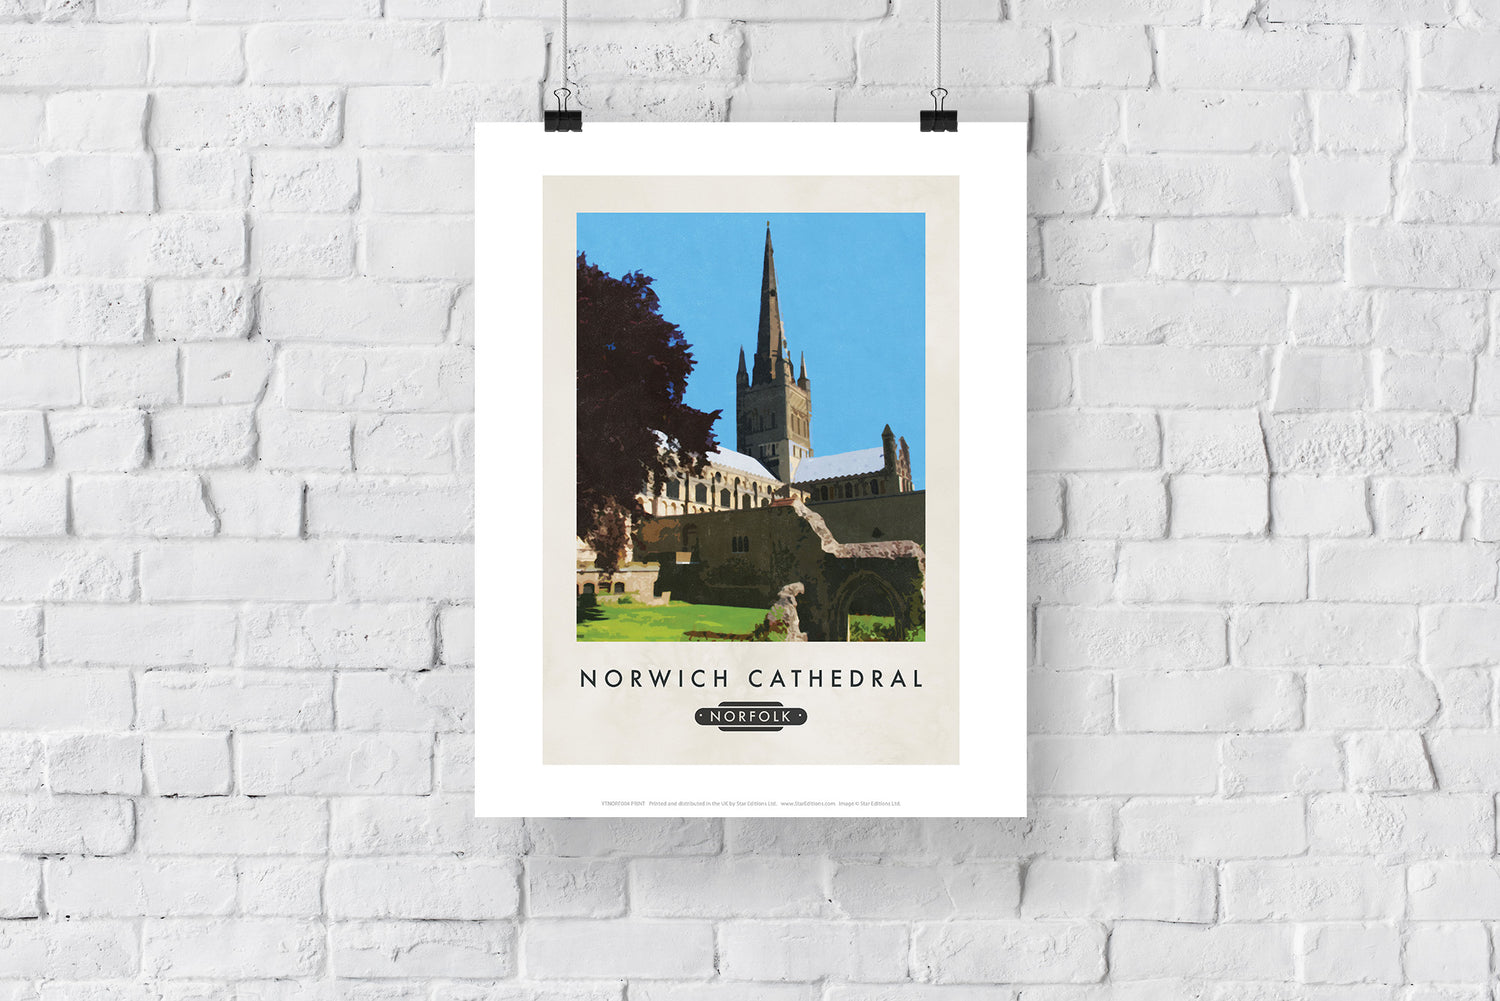 Norwich Cathedral, Norfolk - Art Print